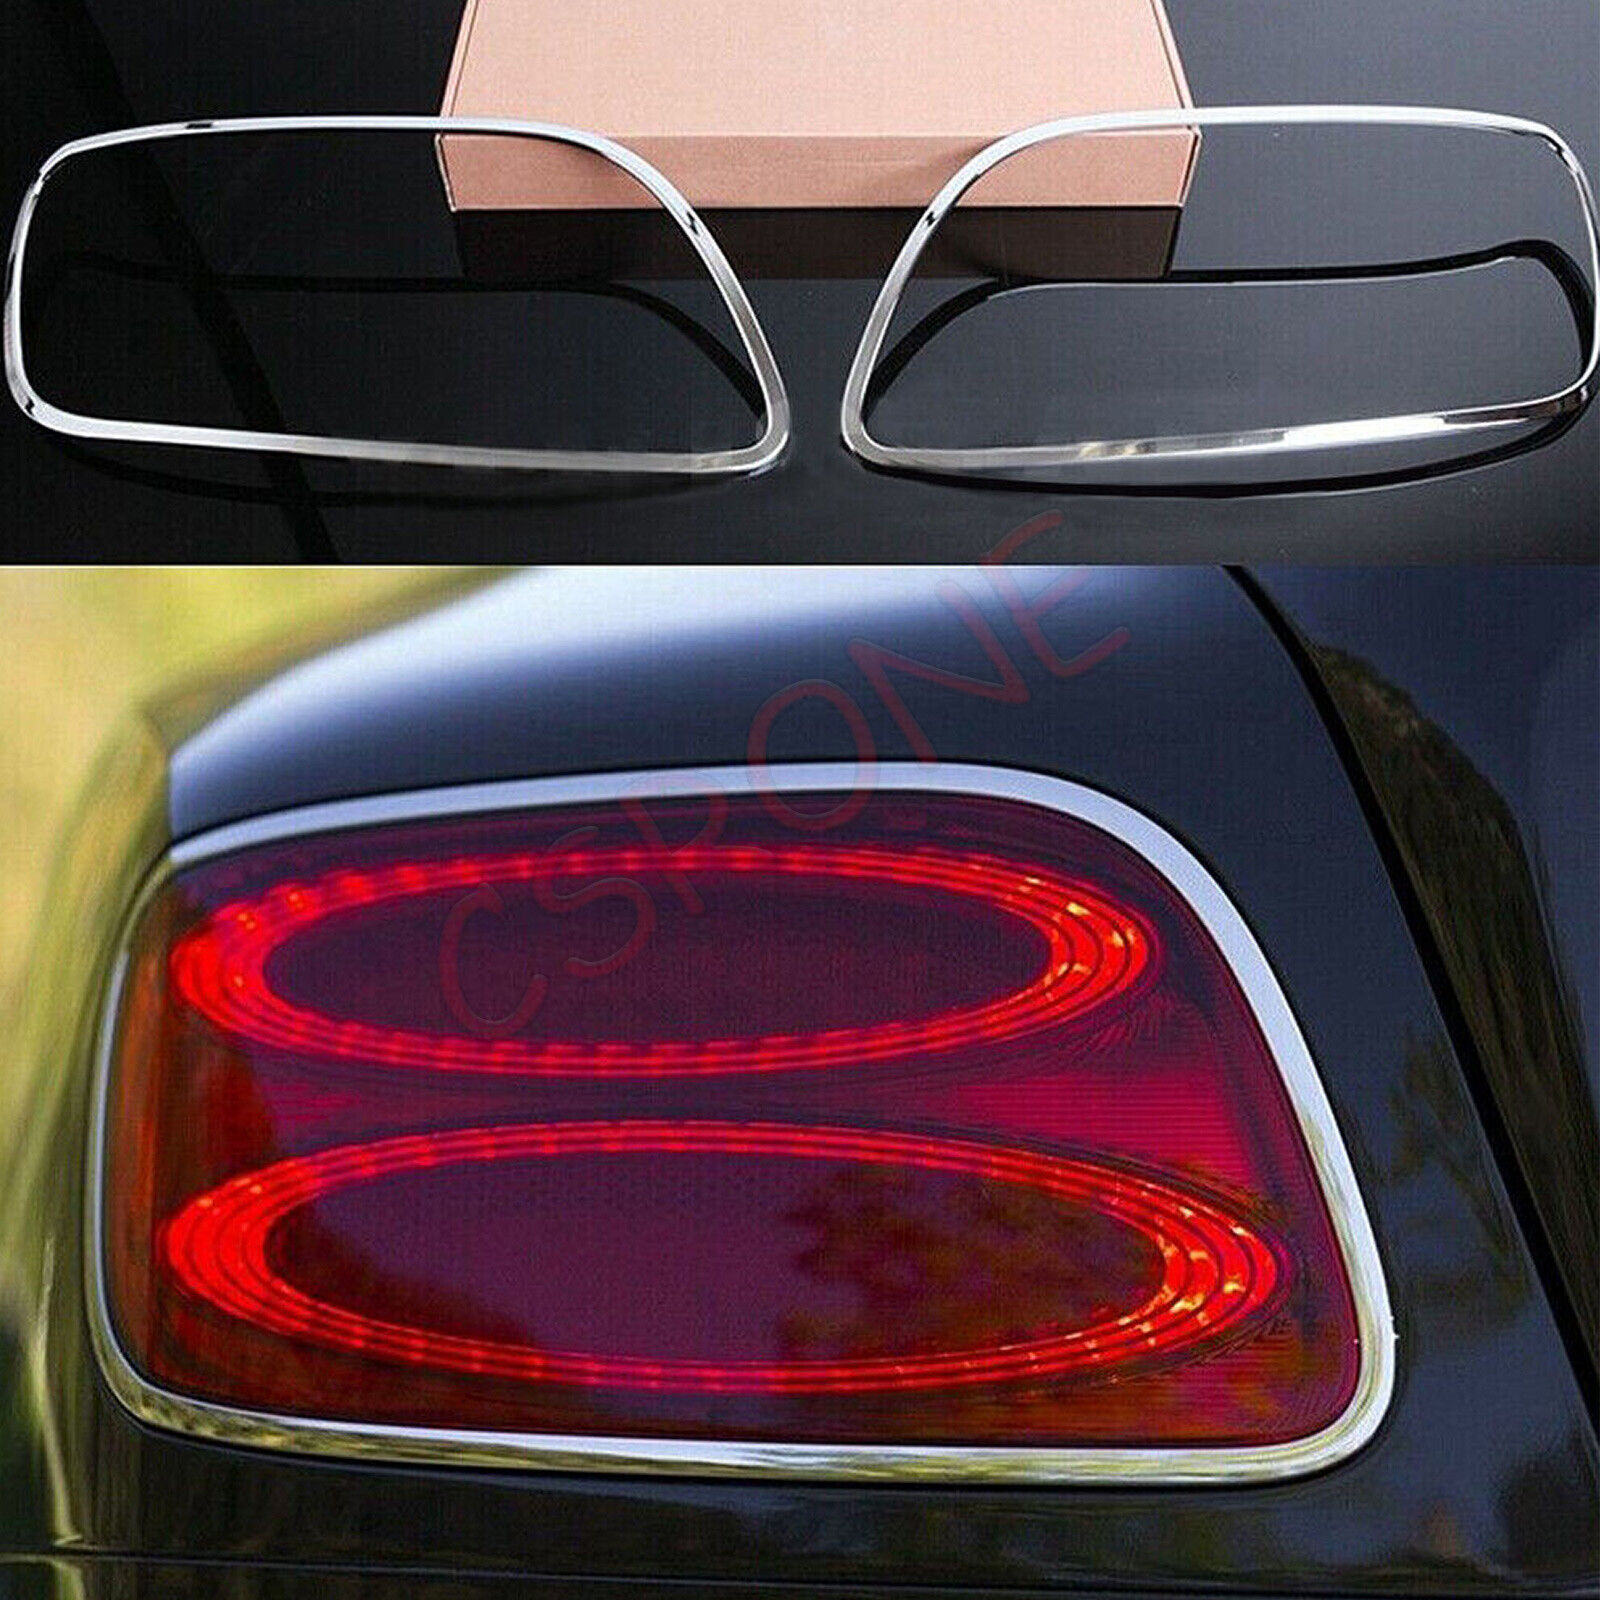 USA STOCK CHROME Rear Light Trims for 2012-2018 Bentley Continental GT GTC SPEED